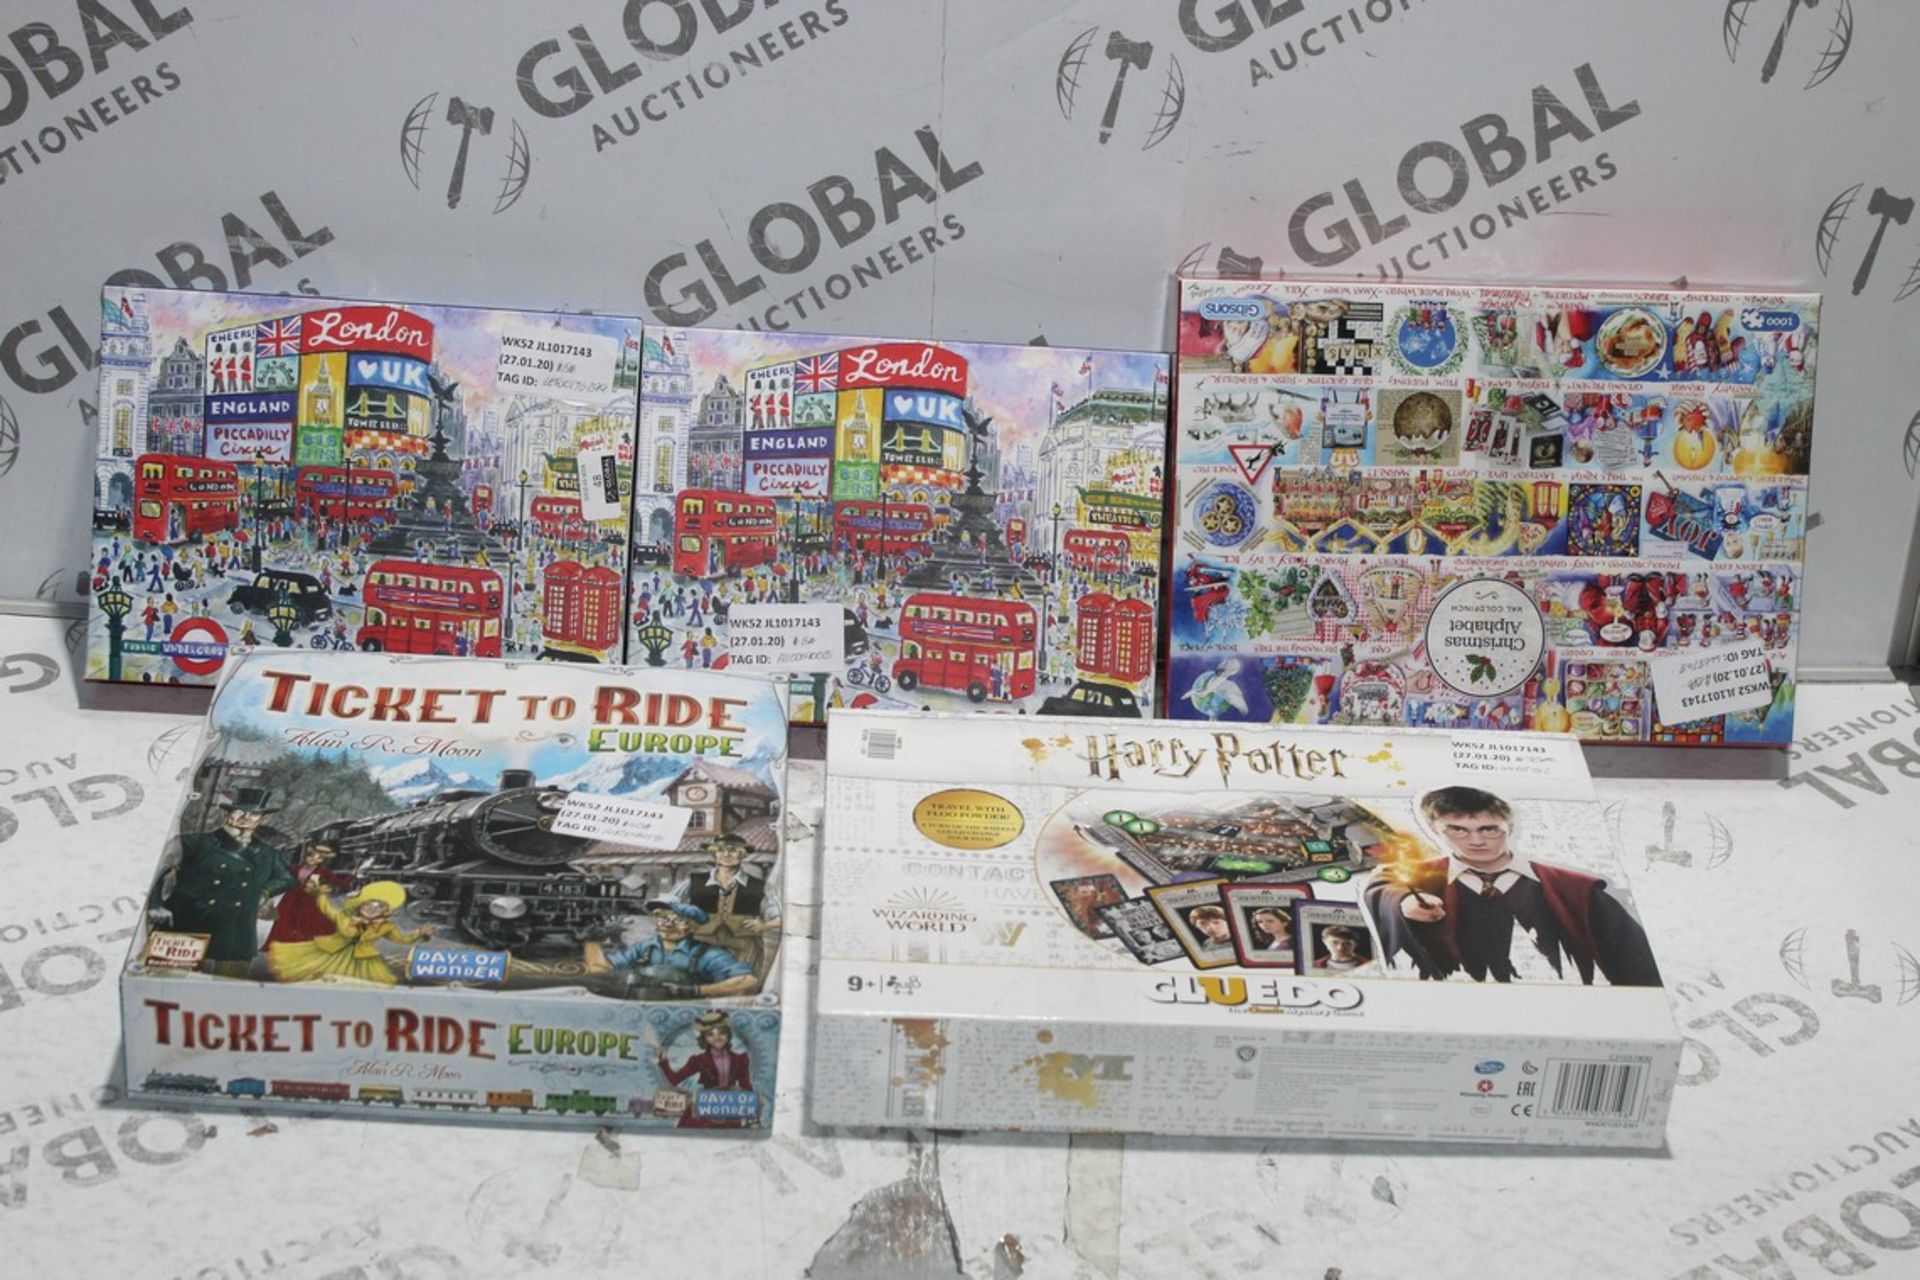 Assorted Toy Items to Include London By Michael Storings Jigsaw Puzzles, Ticket to Ride Europe By